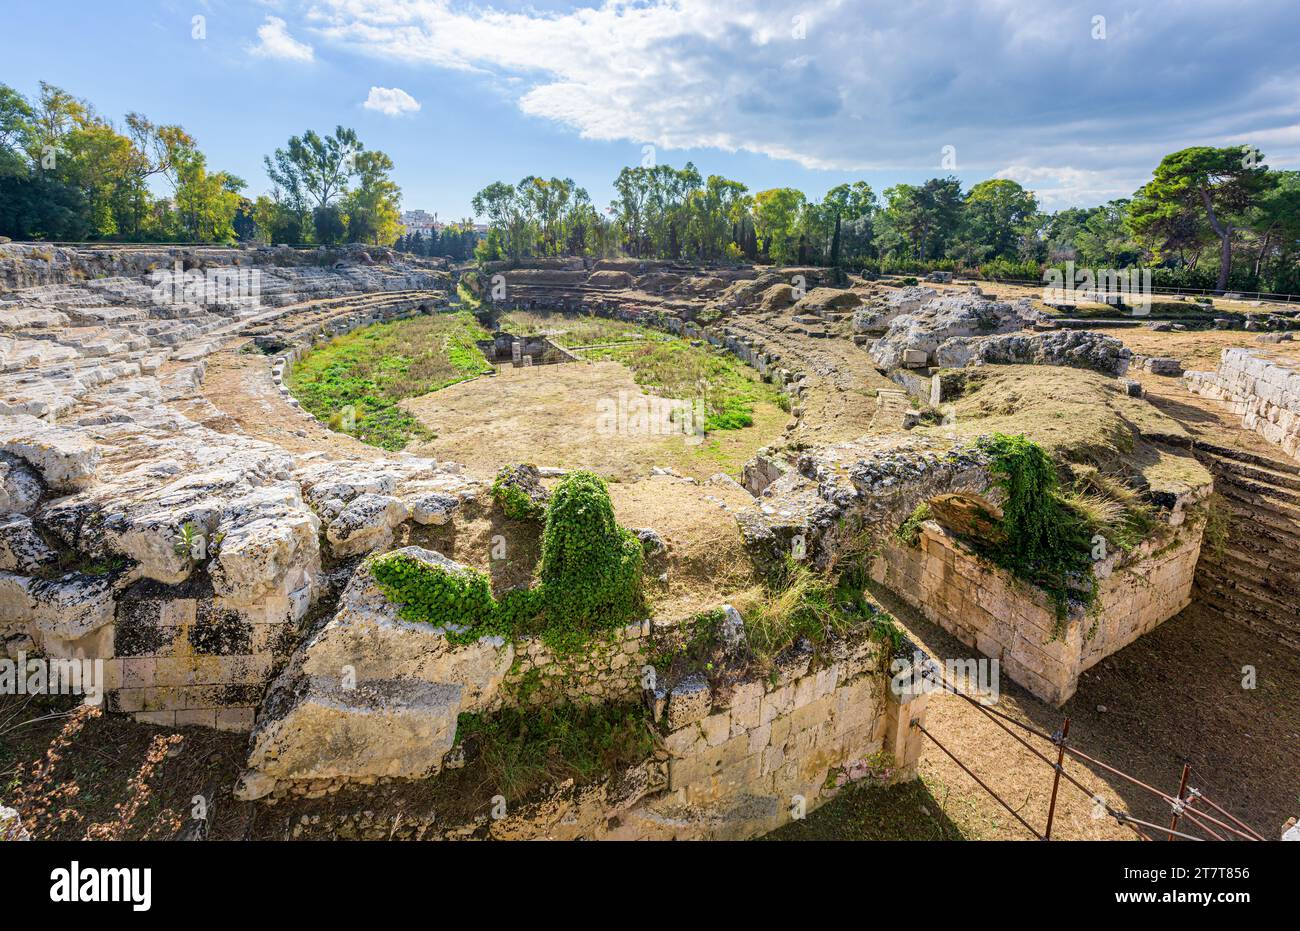 Ruins of ancient Roman amphitheater with typical Colosseum oval shape in Ortigia, an island in Syracuse, Sicily, Italy Stock Photo